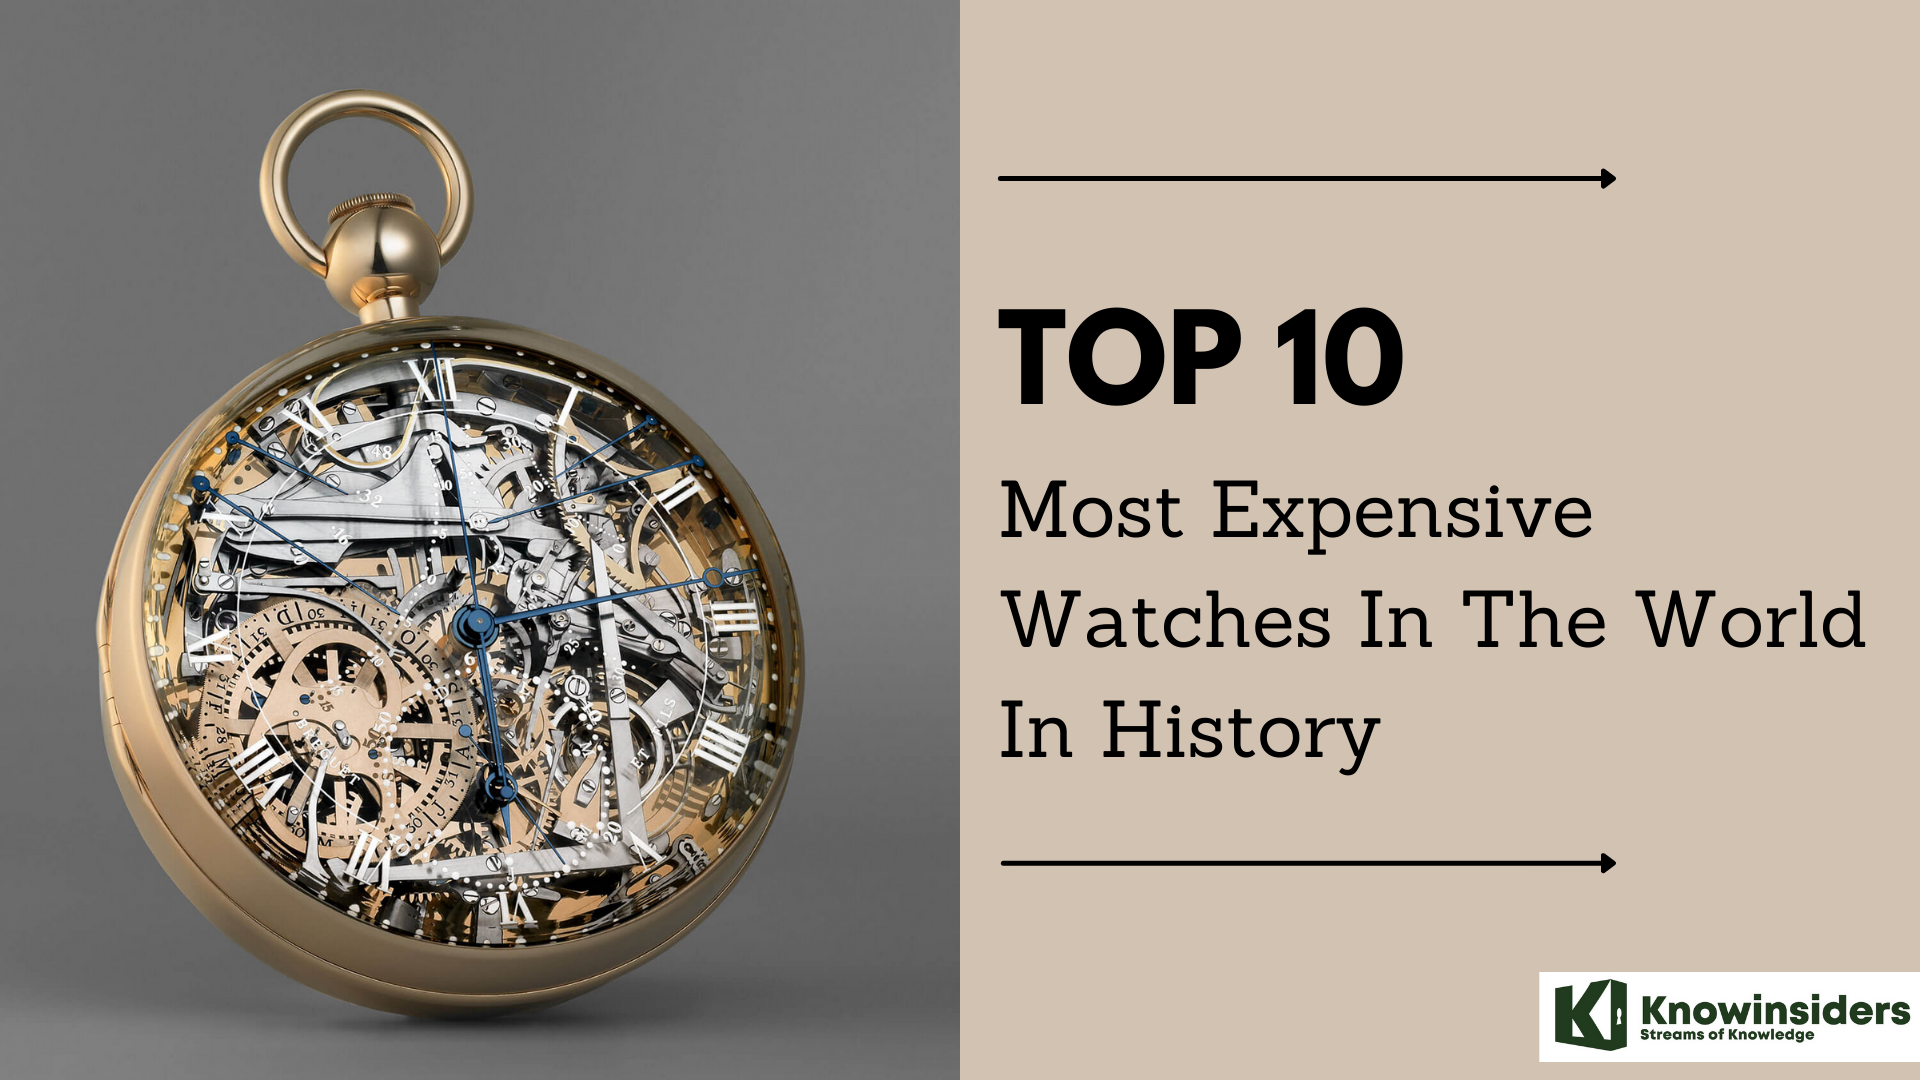 Top 10 Most Expensive Watches in the World In History